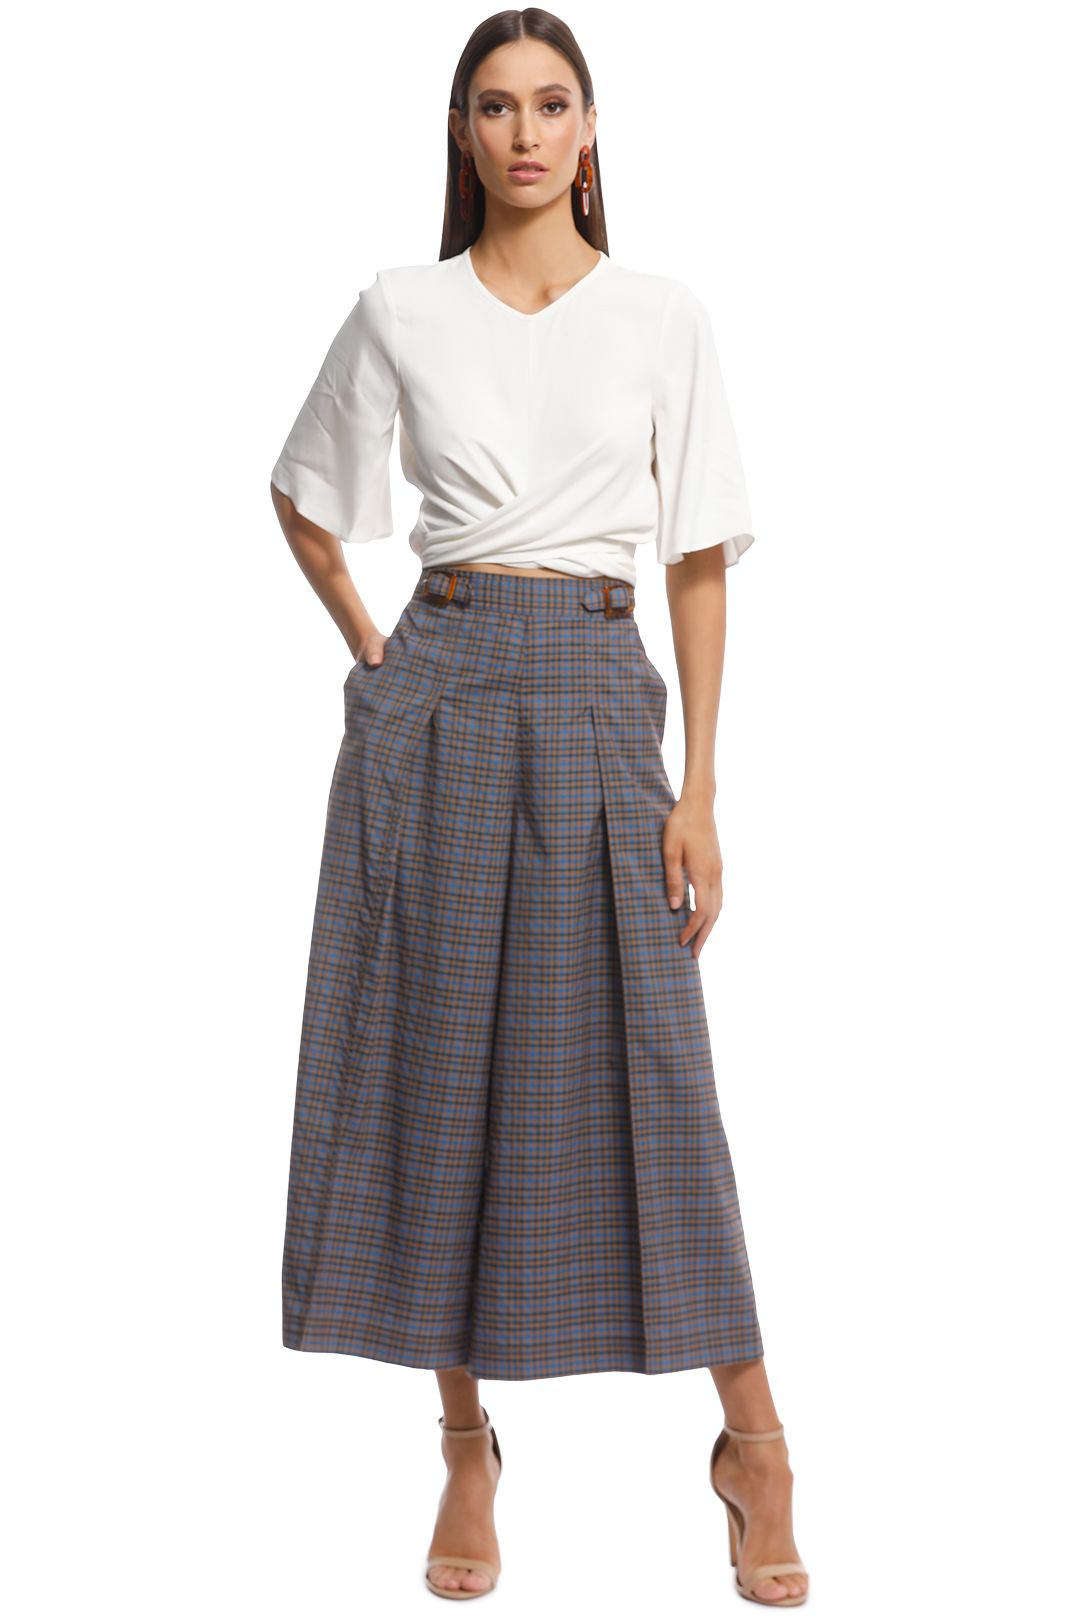 The East Order - Melody Pant - Blue Check - Front